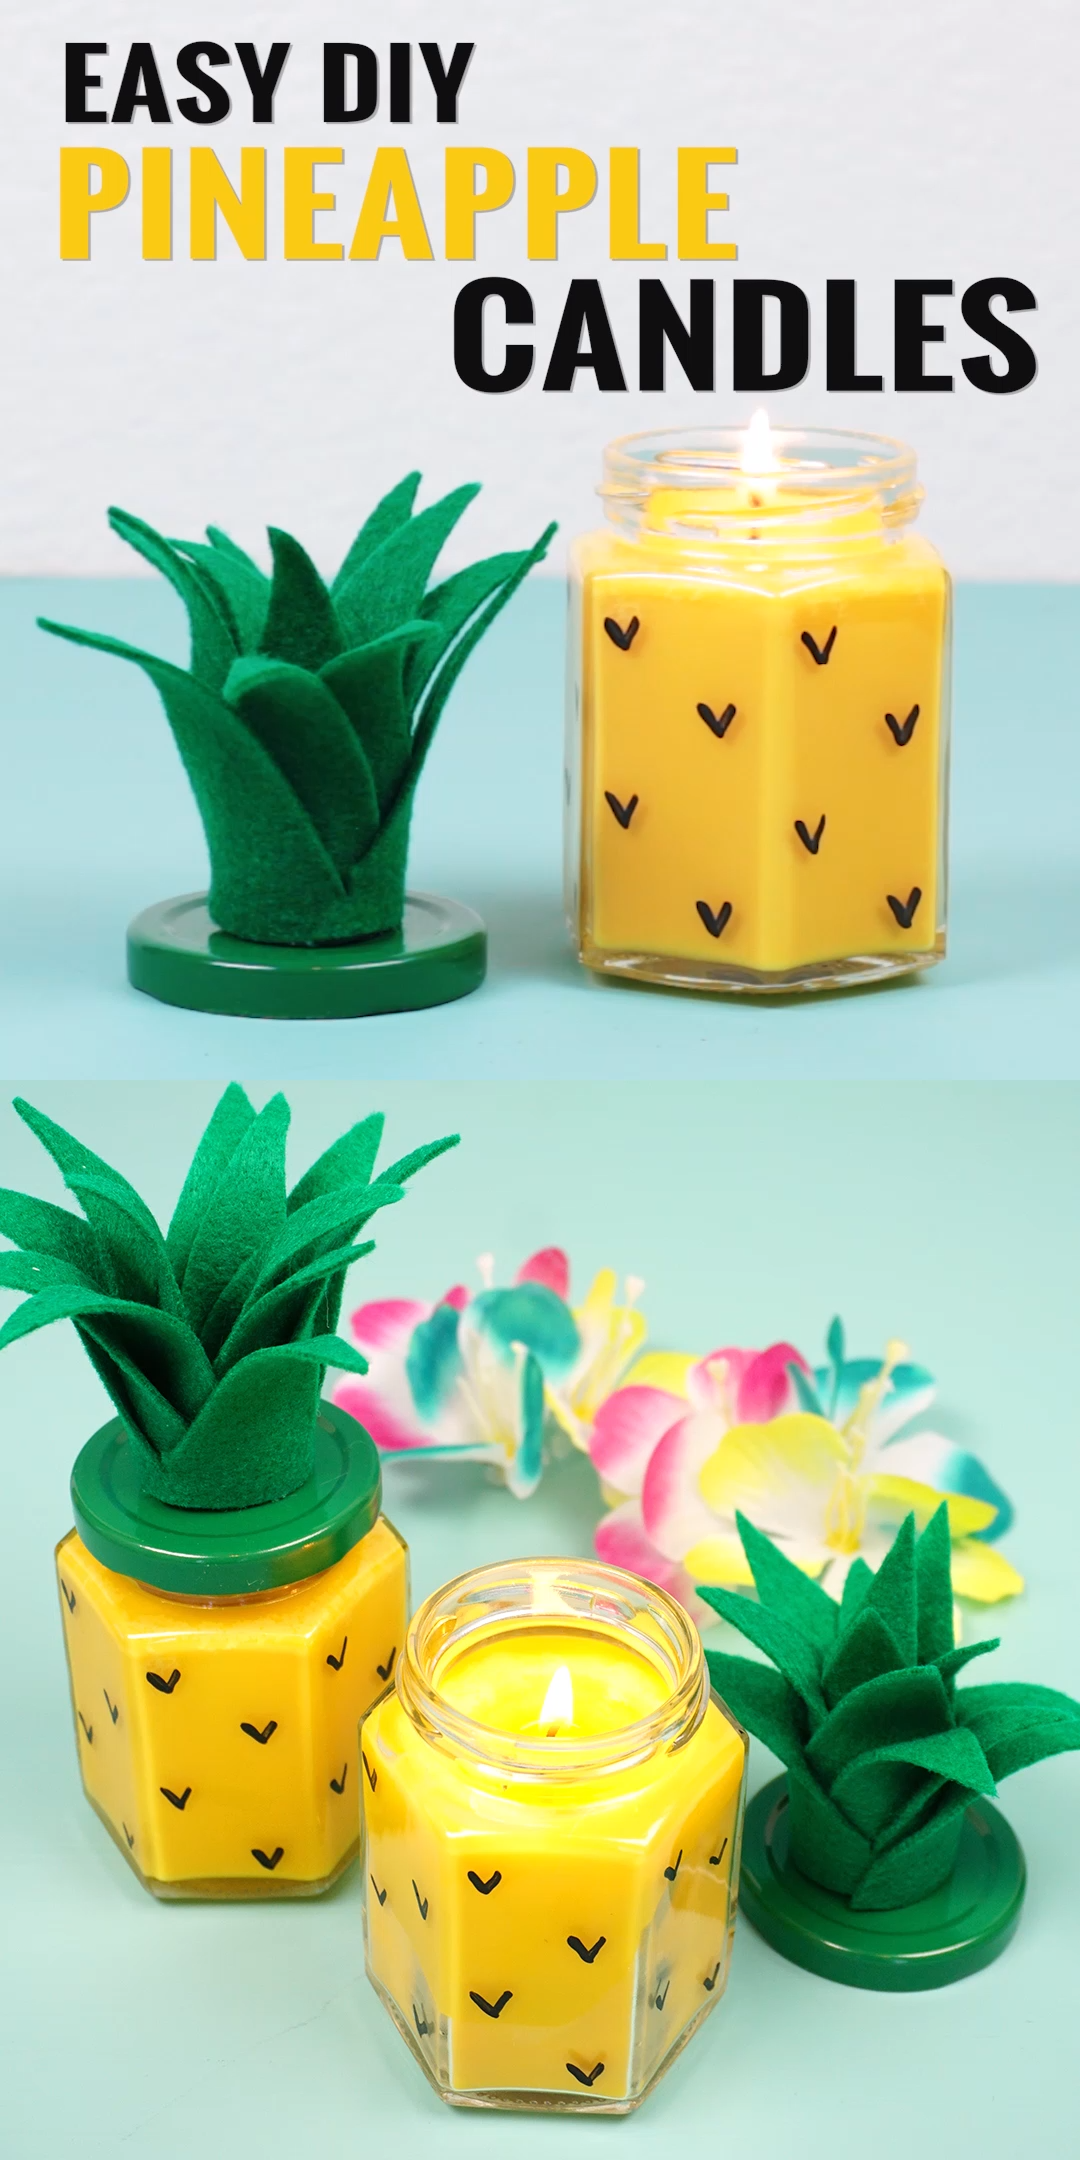 Easy DIY Pineapple Candles - Easy DIY Pineapple Candles -   15 diy Candles cupcake ideas